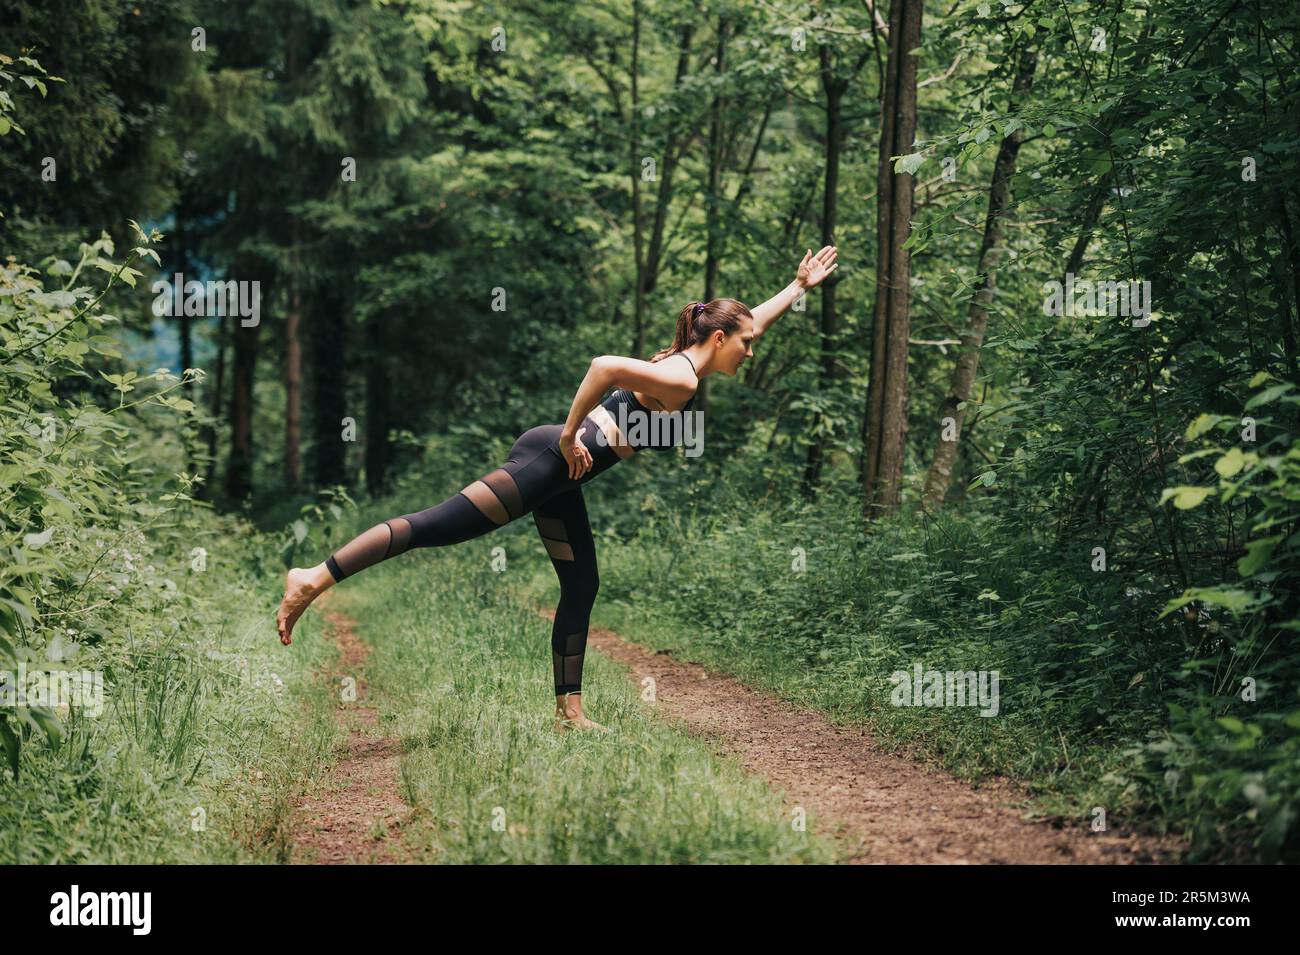 Young fit woman practicing yoga in summer forest, wearing black leggings and top Stock Photo